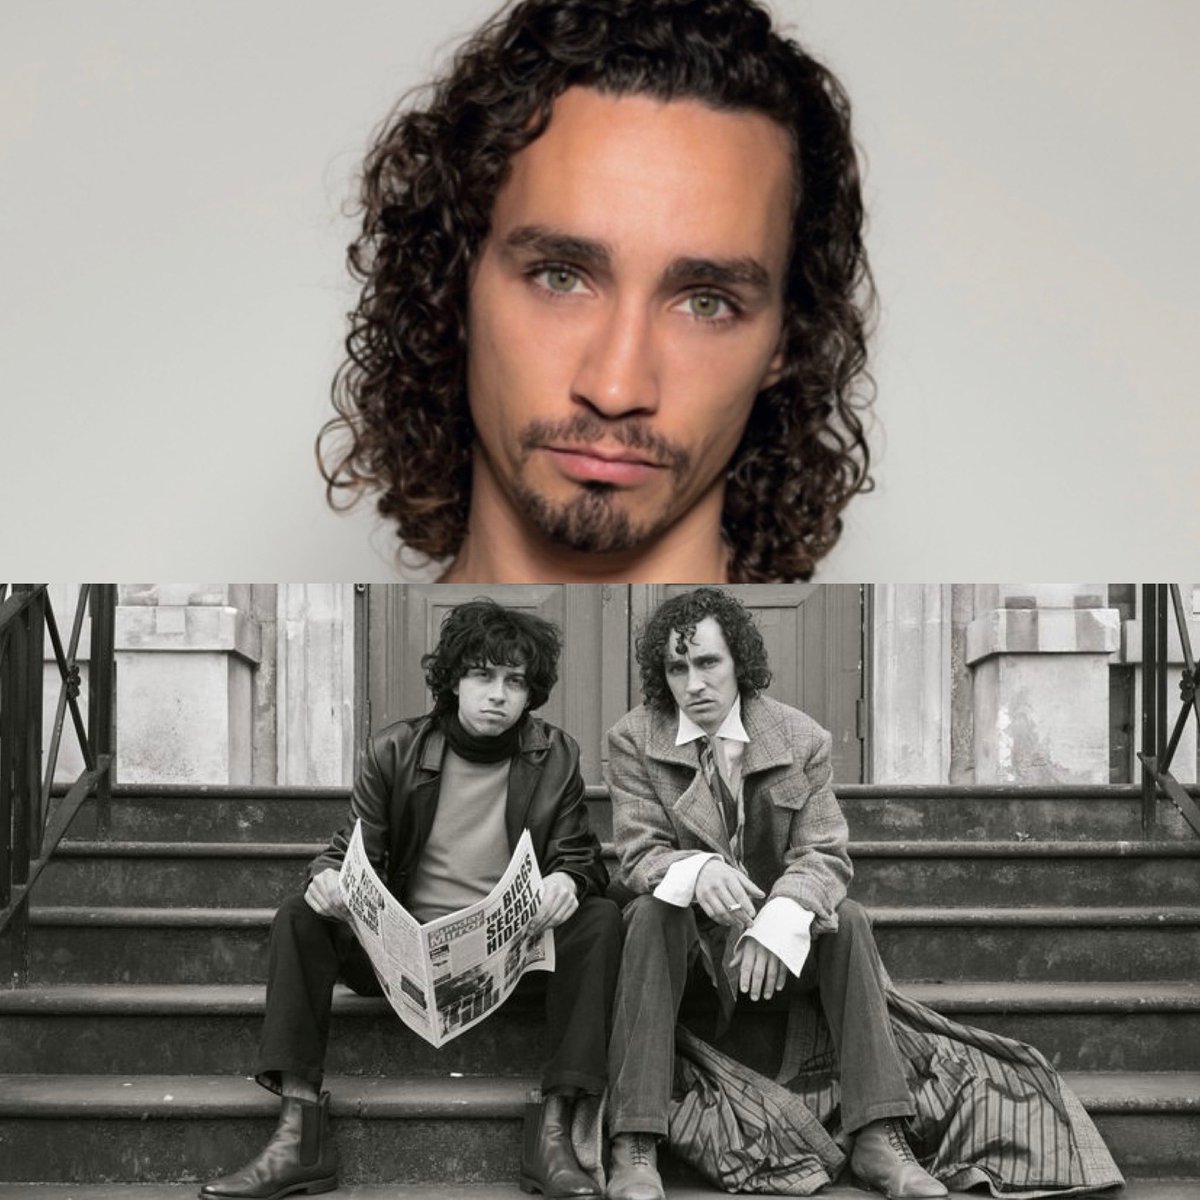 ‘I’m exhausted from laughing so much’ Sarah after watching Robert Sheehan & Adonis Sinclair in ‘Withnail and I’ We can’t review the play as it’ll spoil things for people yet to go but let’s just say the cast @BirminghamRep made the roles their own. The audiences are loving it! ©